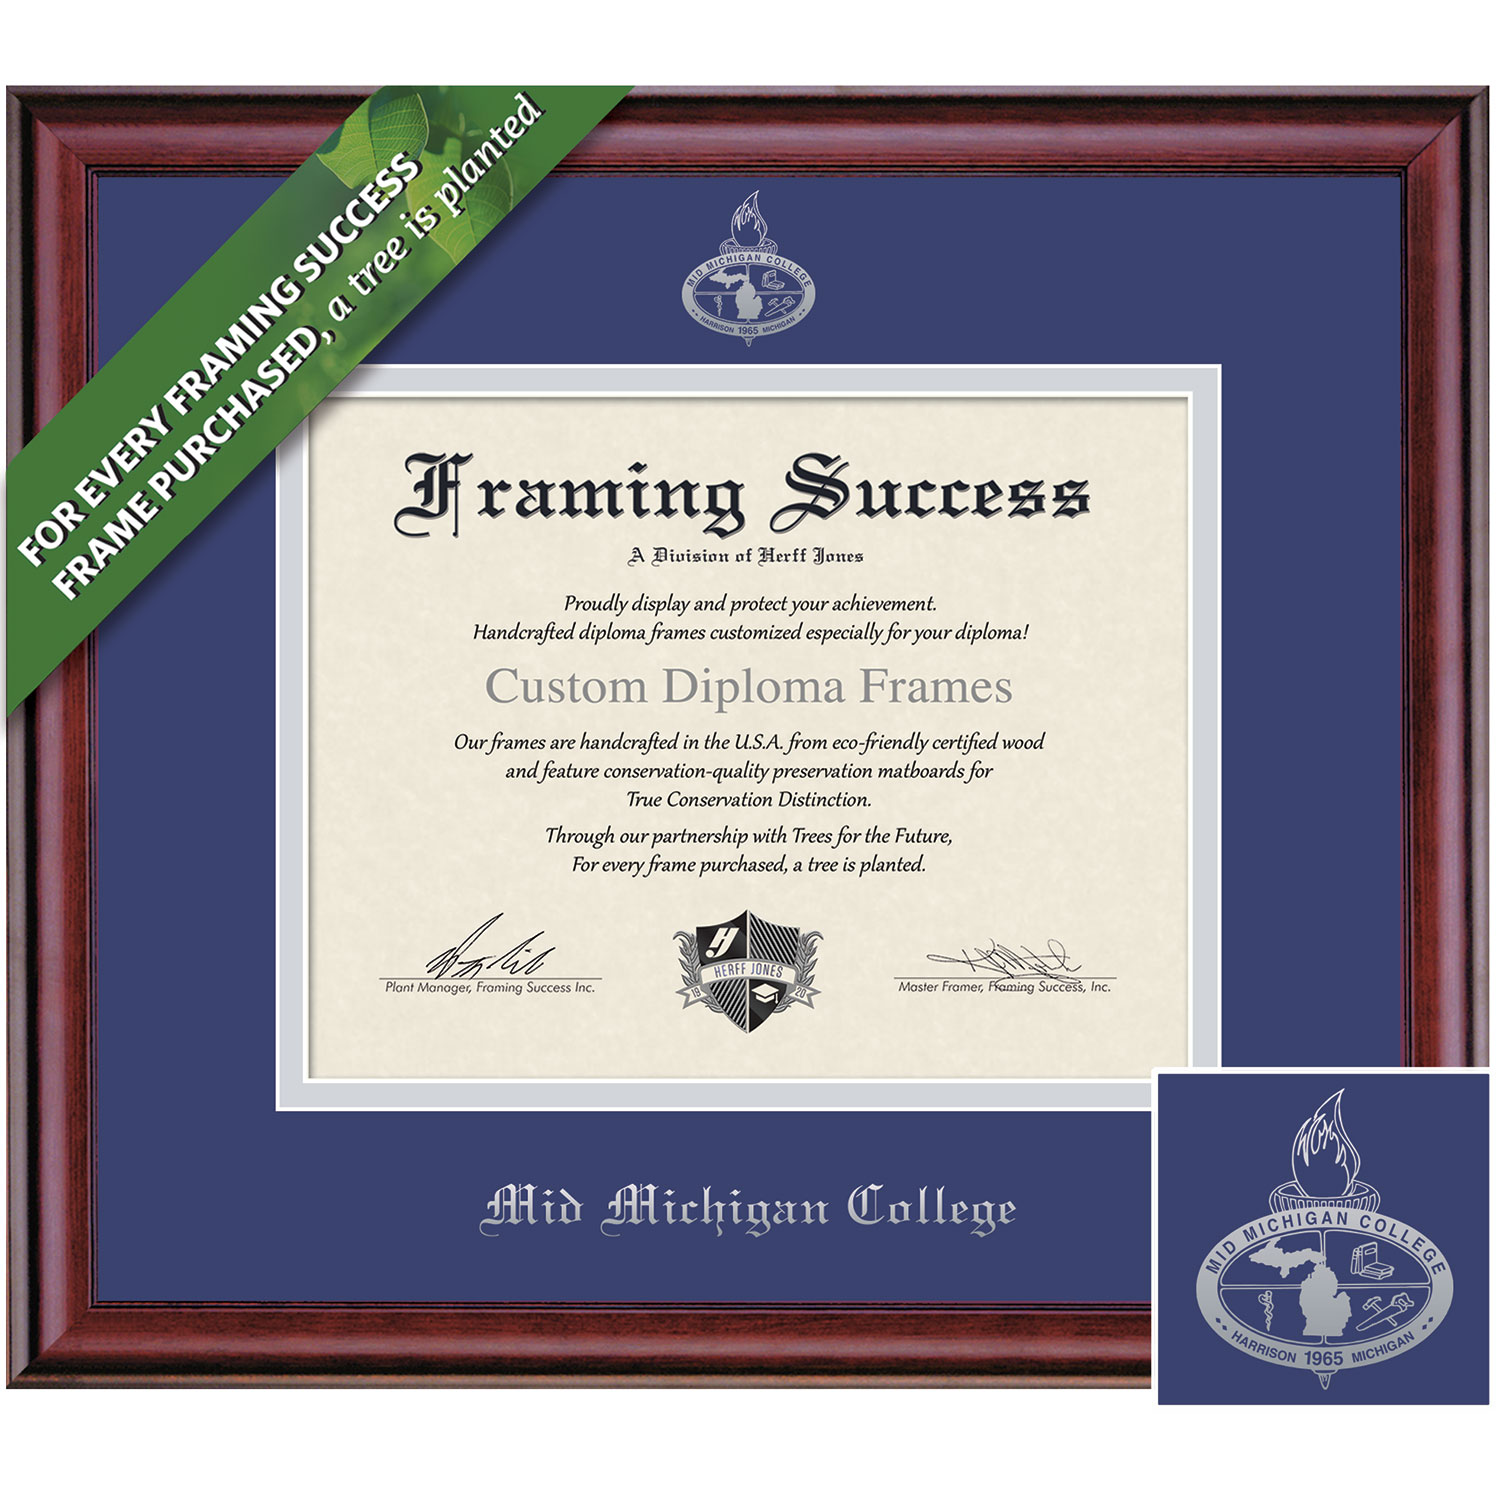 Framing Success 8.5 x 11 Classic Silver Embossed School Seal Associates Diploma Frame